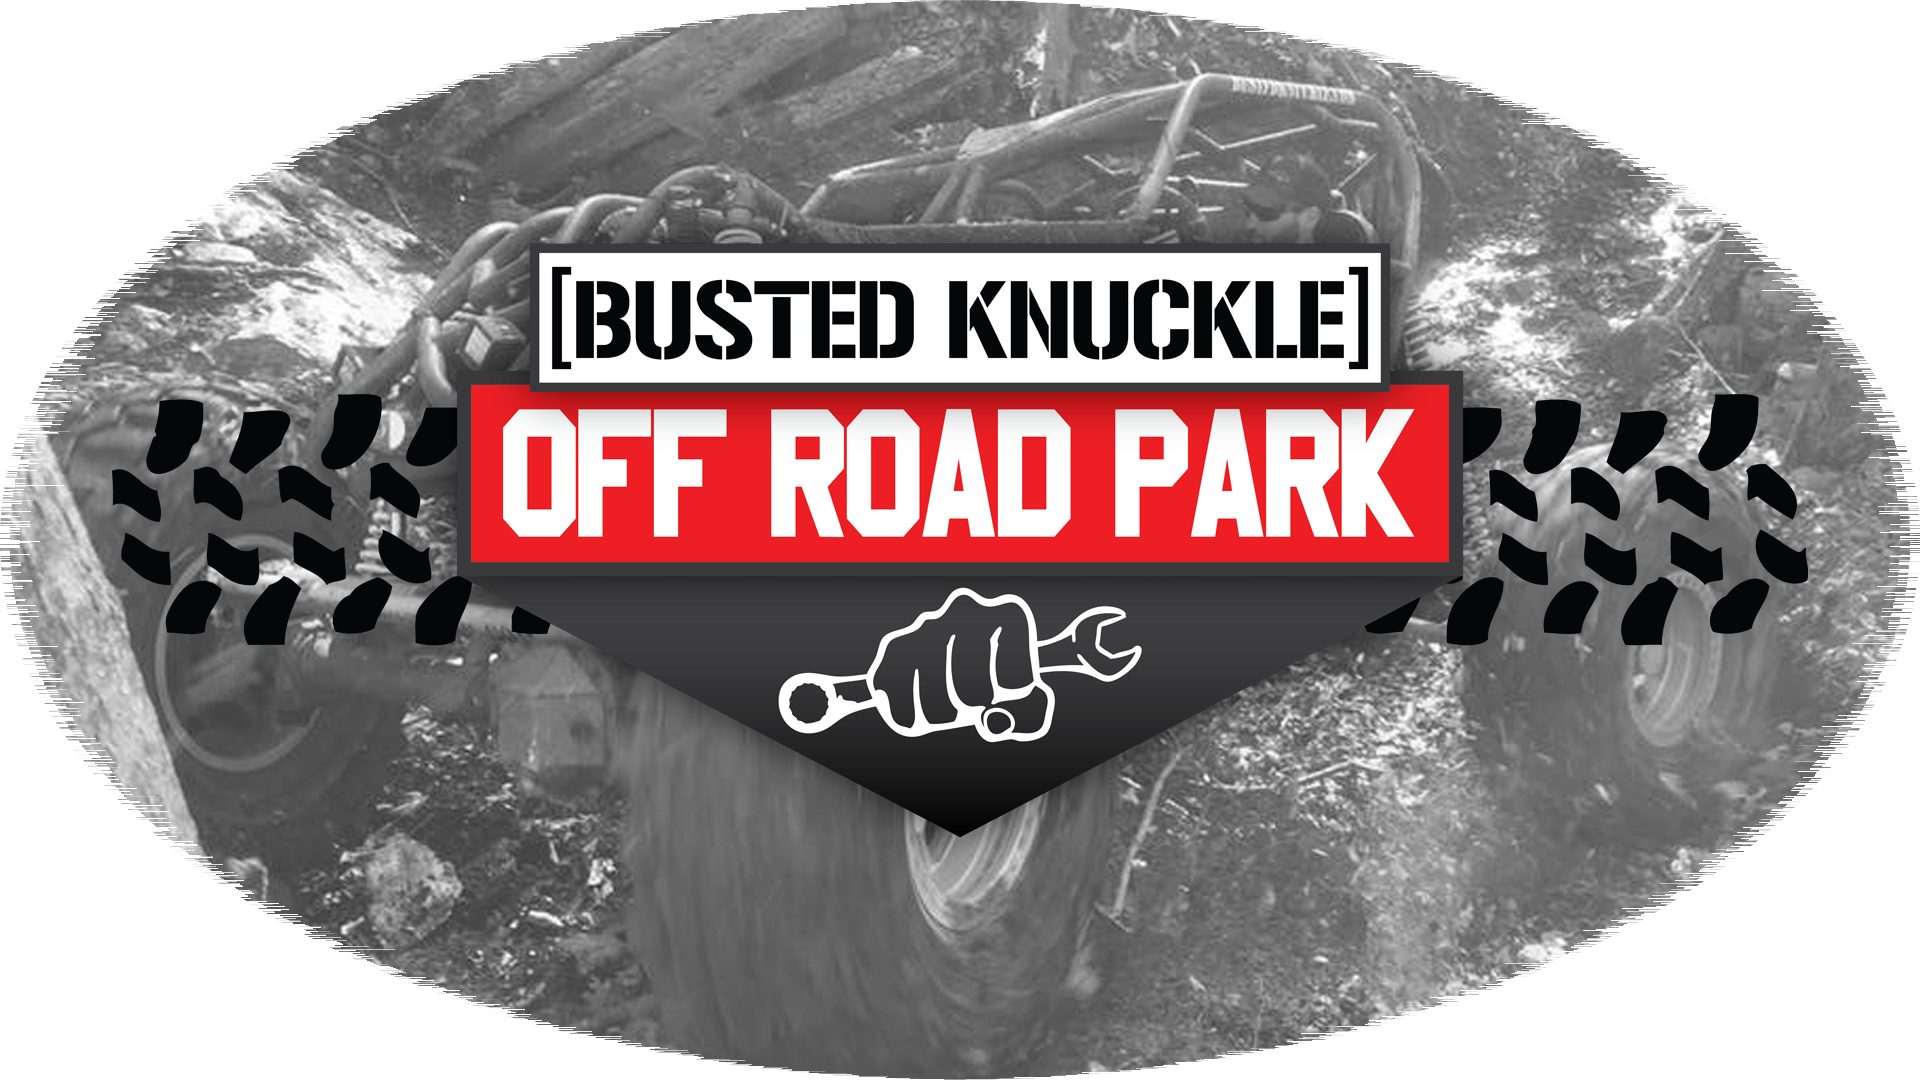 Busted Knuckle Off Road Park